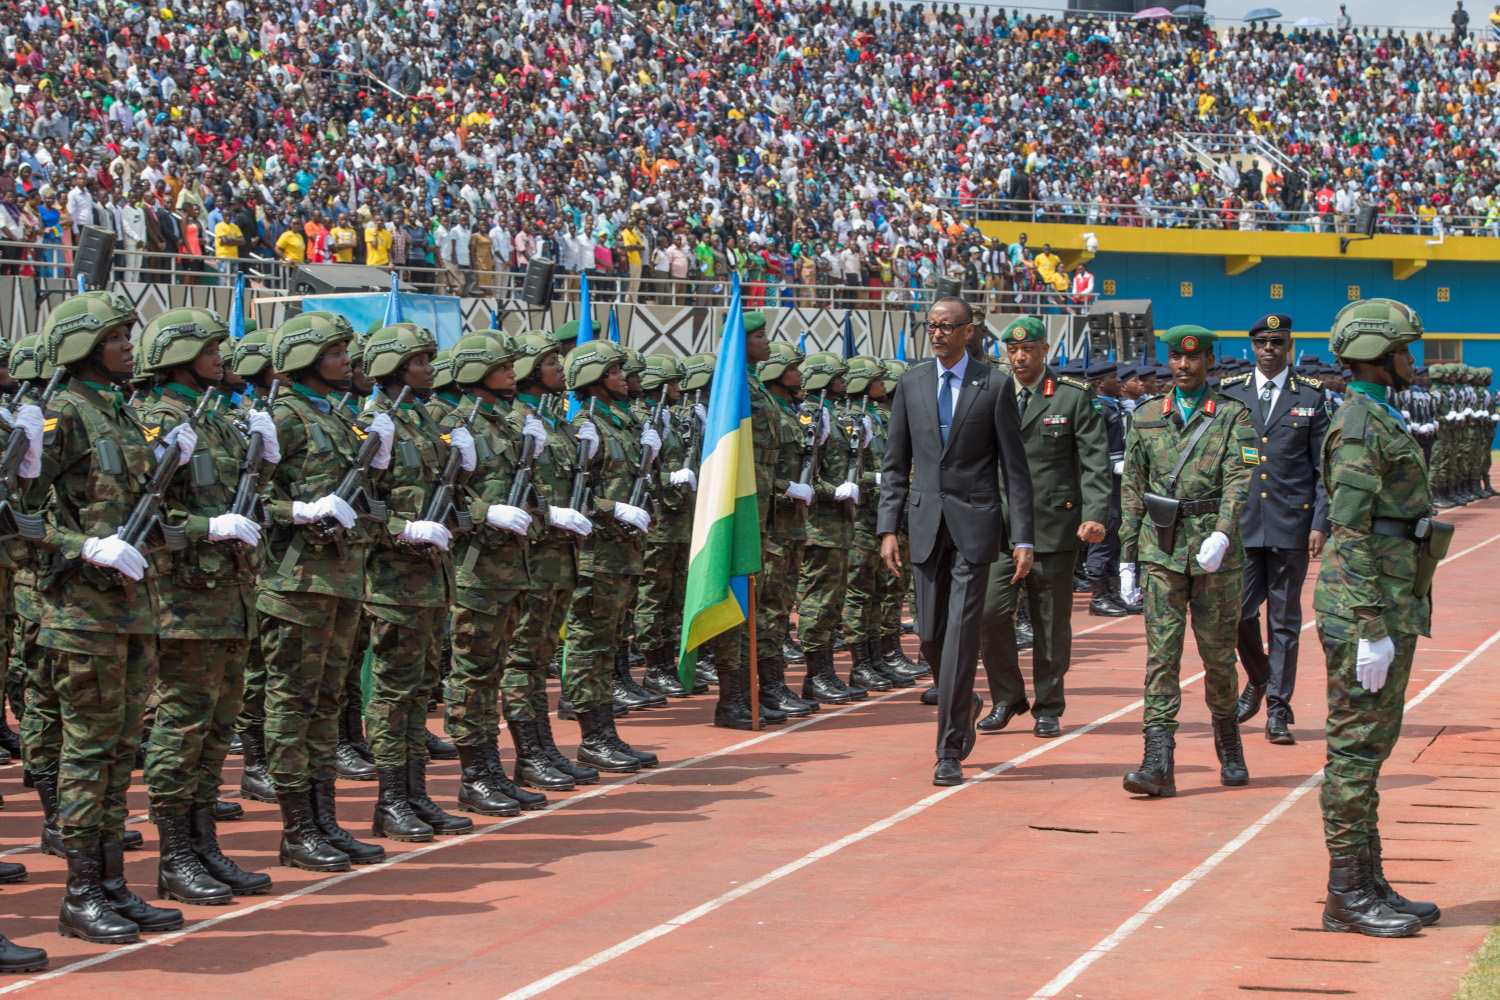 President Paul Kagame inspects a parade mounted by Rwanda Defence Force and Rwanda National Police at Amahoro National Stadium in Kigali yesterday. The Commander-In-Chief is flanked by Gen. Patrick Nyamvumba, the RDF Chief of Defence Staff, Inspector General of Police Dan Munyuza, and Brig. Gen. John Baptist Ngiruwonsanga, the head of the parade. / Village Urugwiro